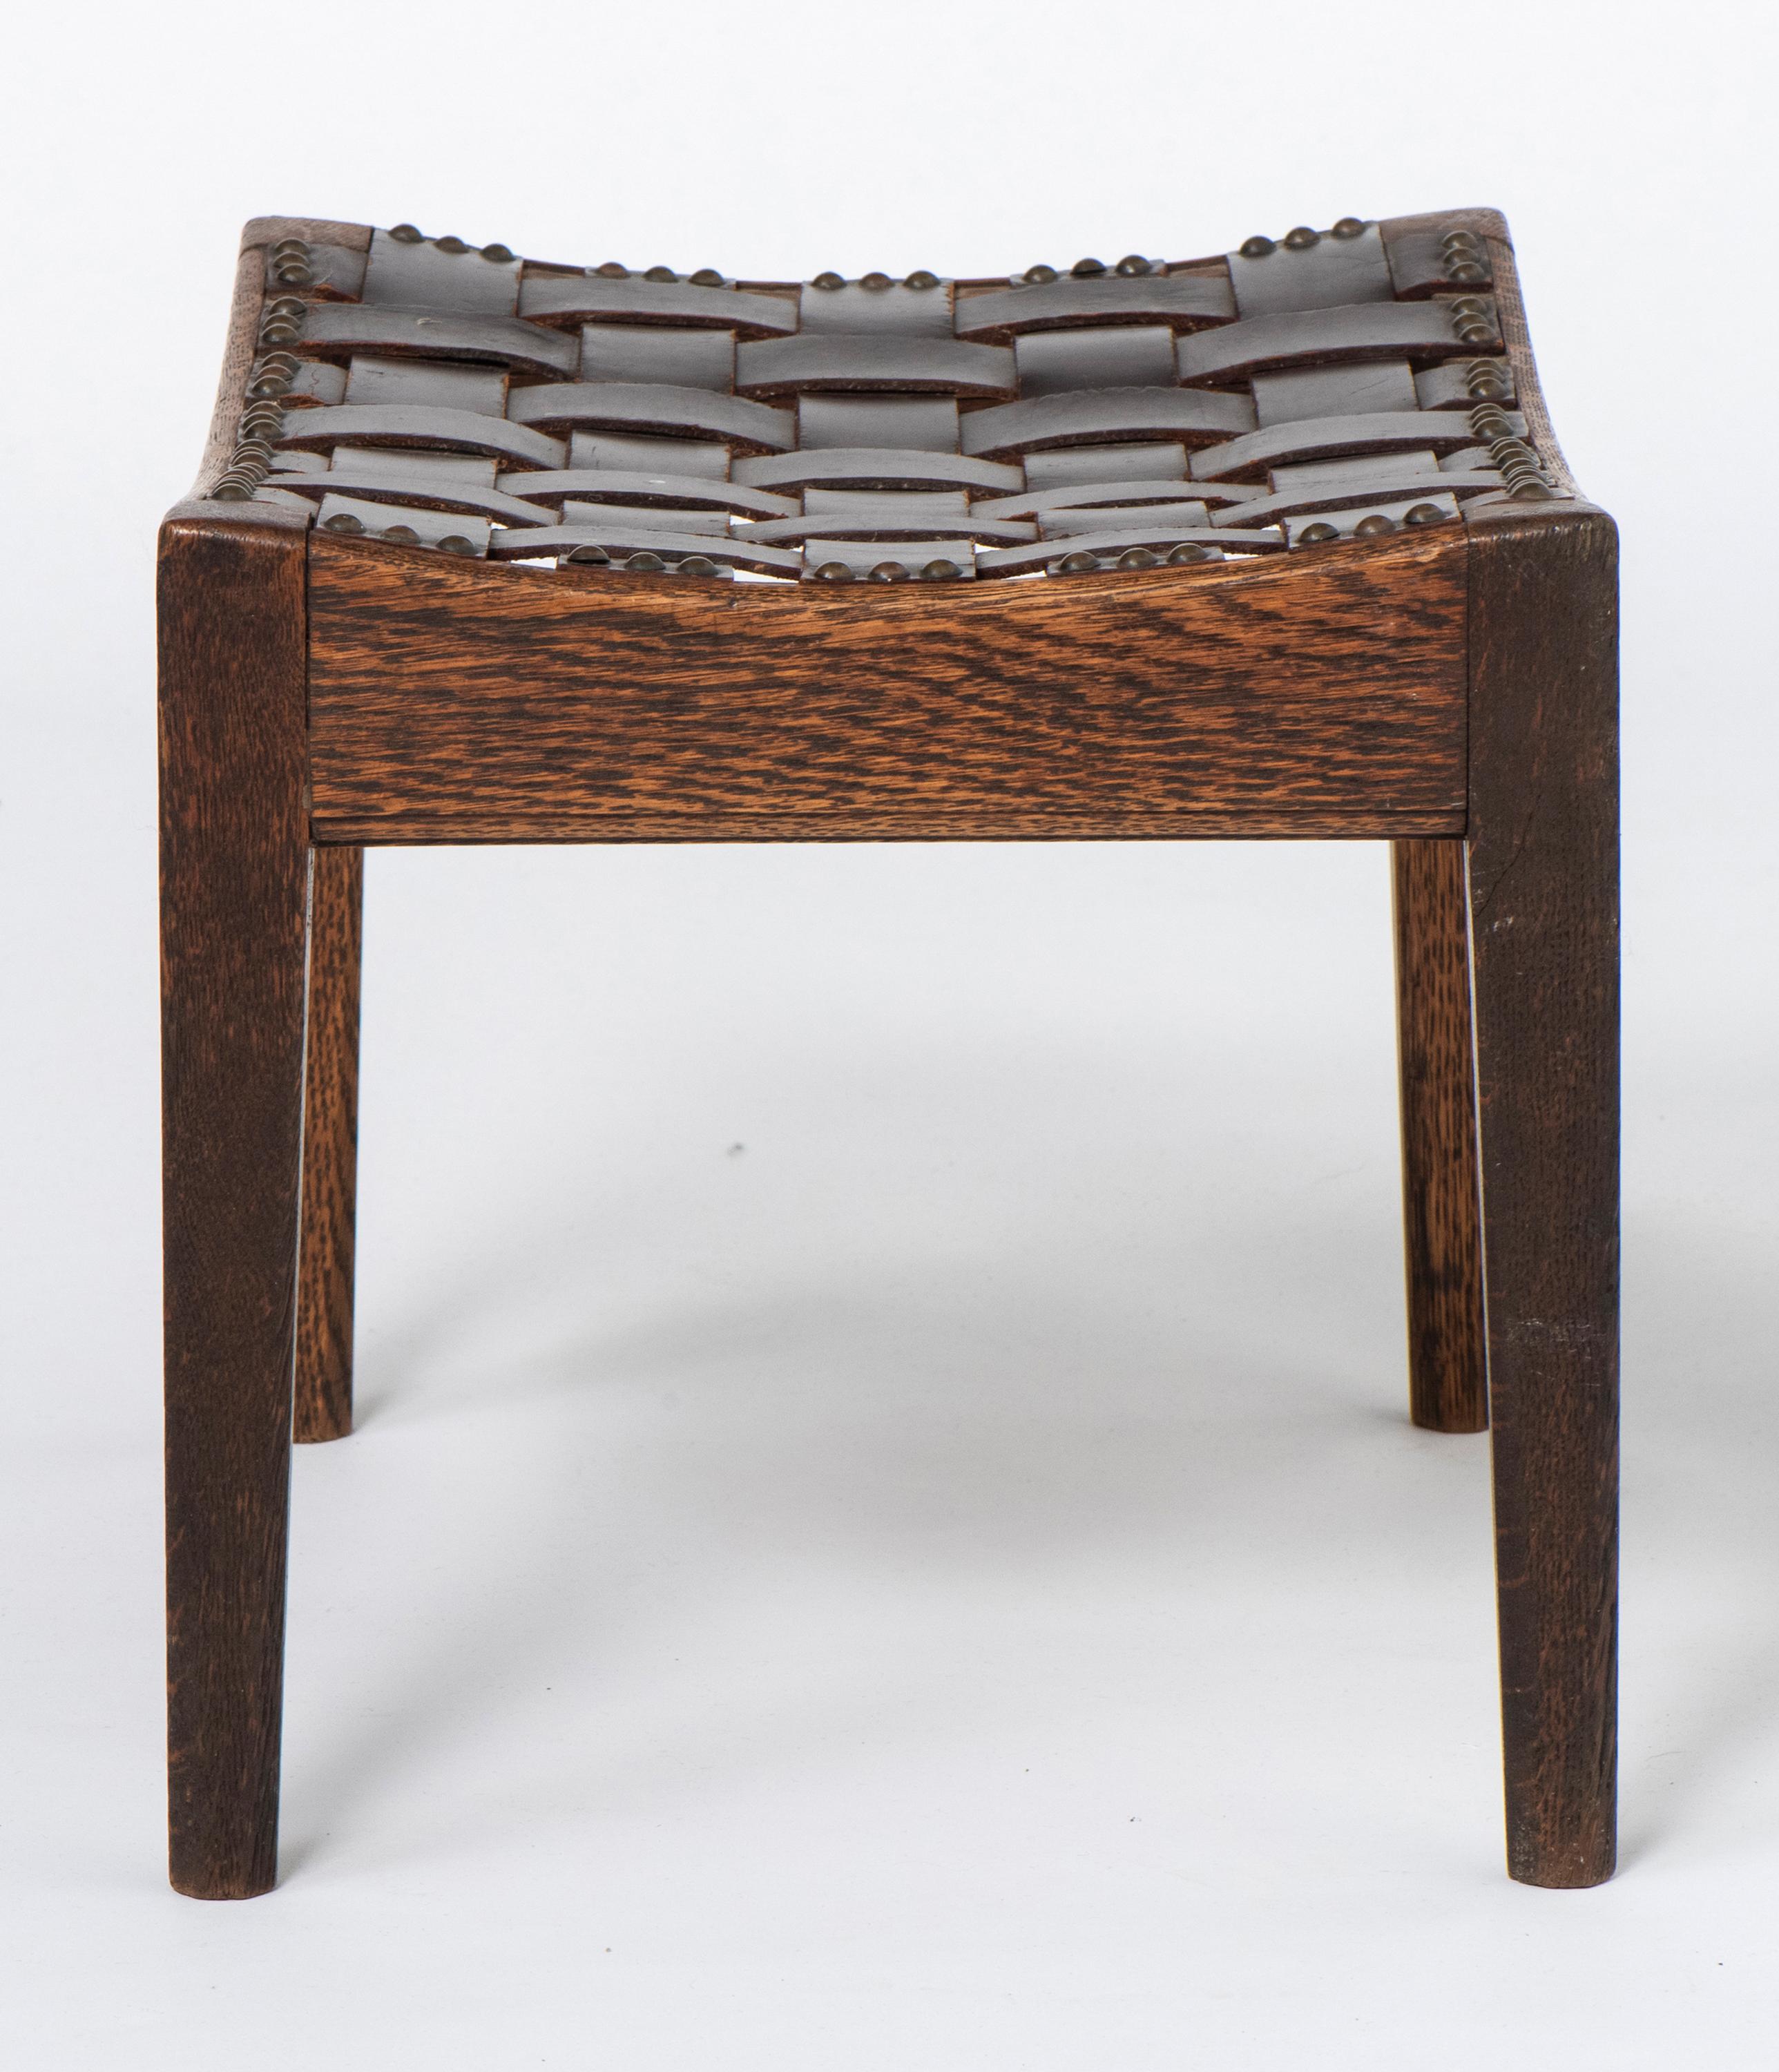 Oak stool by Arthur W Simpson of Kendal. (1854-1922)
Of simple rectangular concave seats with leather slatted tops.
Tapering legs.
England, circa 1920
Measures: 40 cm wide x 30.5 cm deep x 30.5 cm high.
 